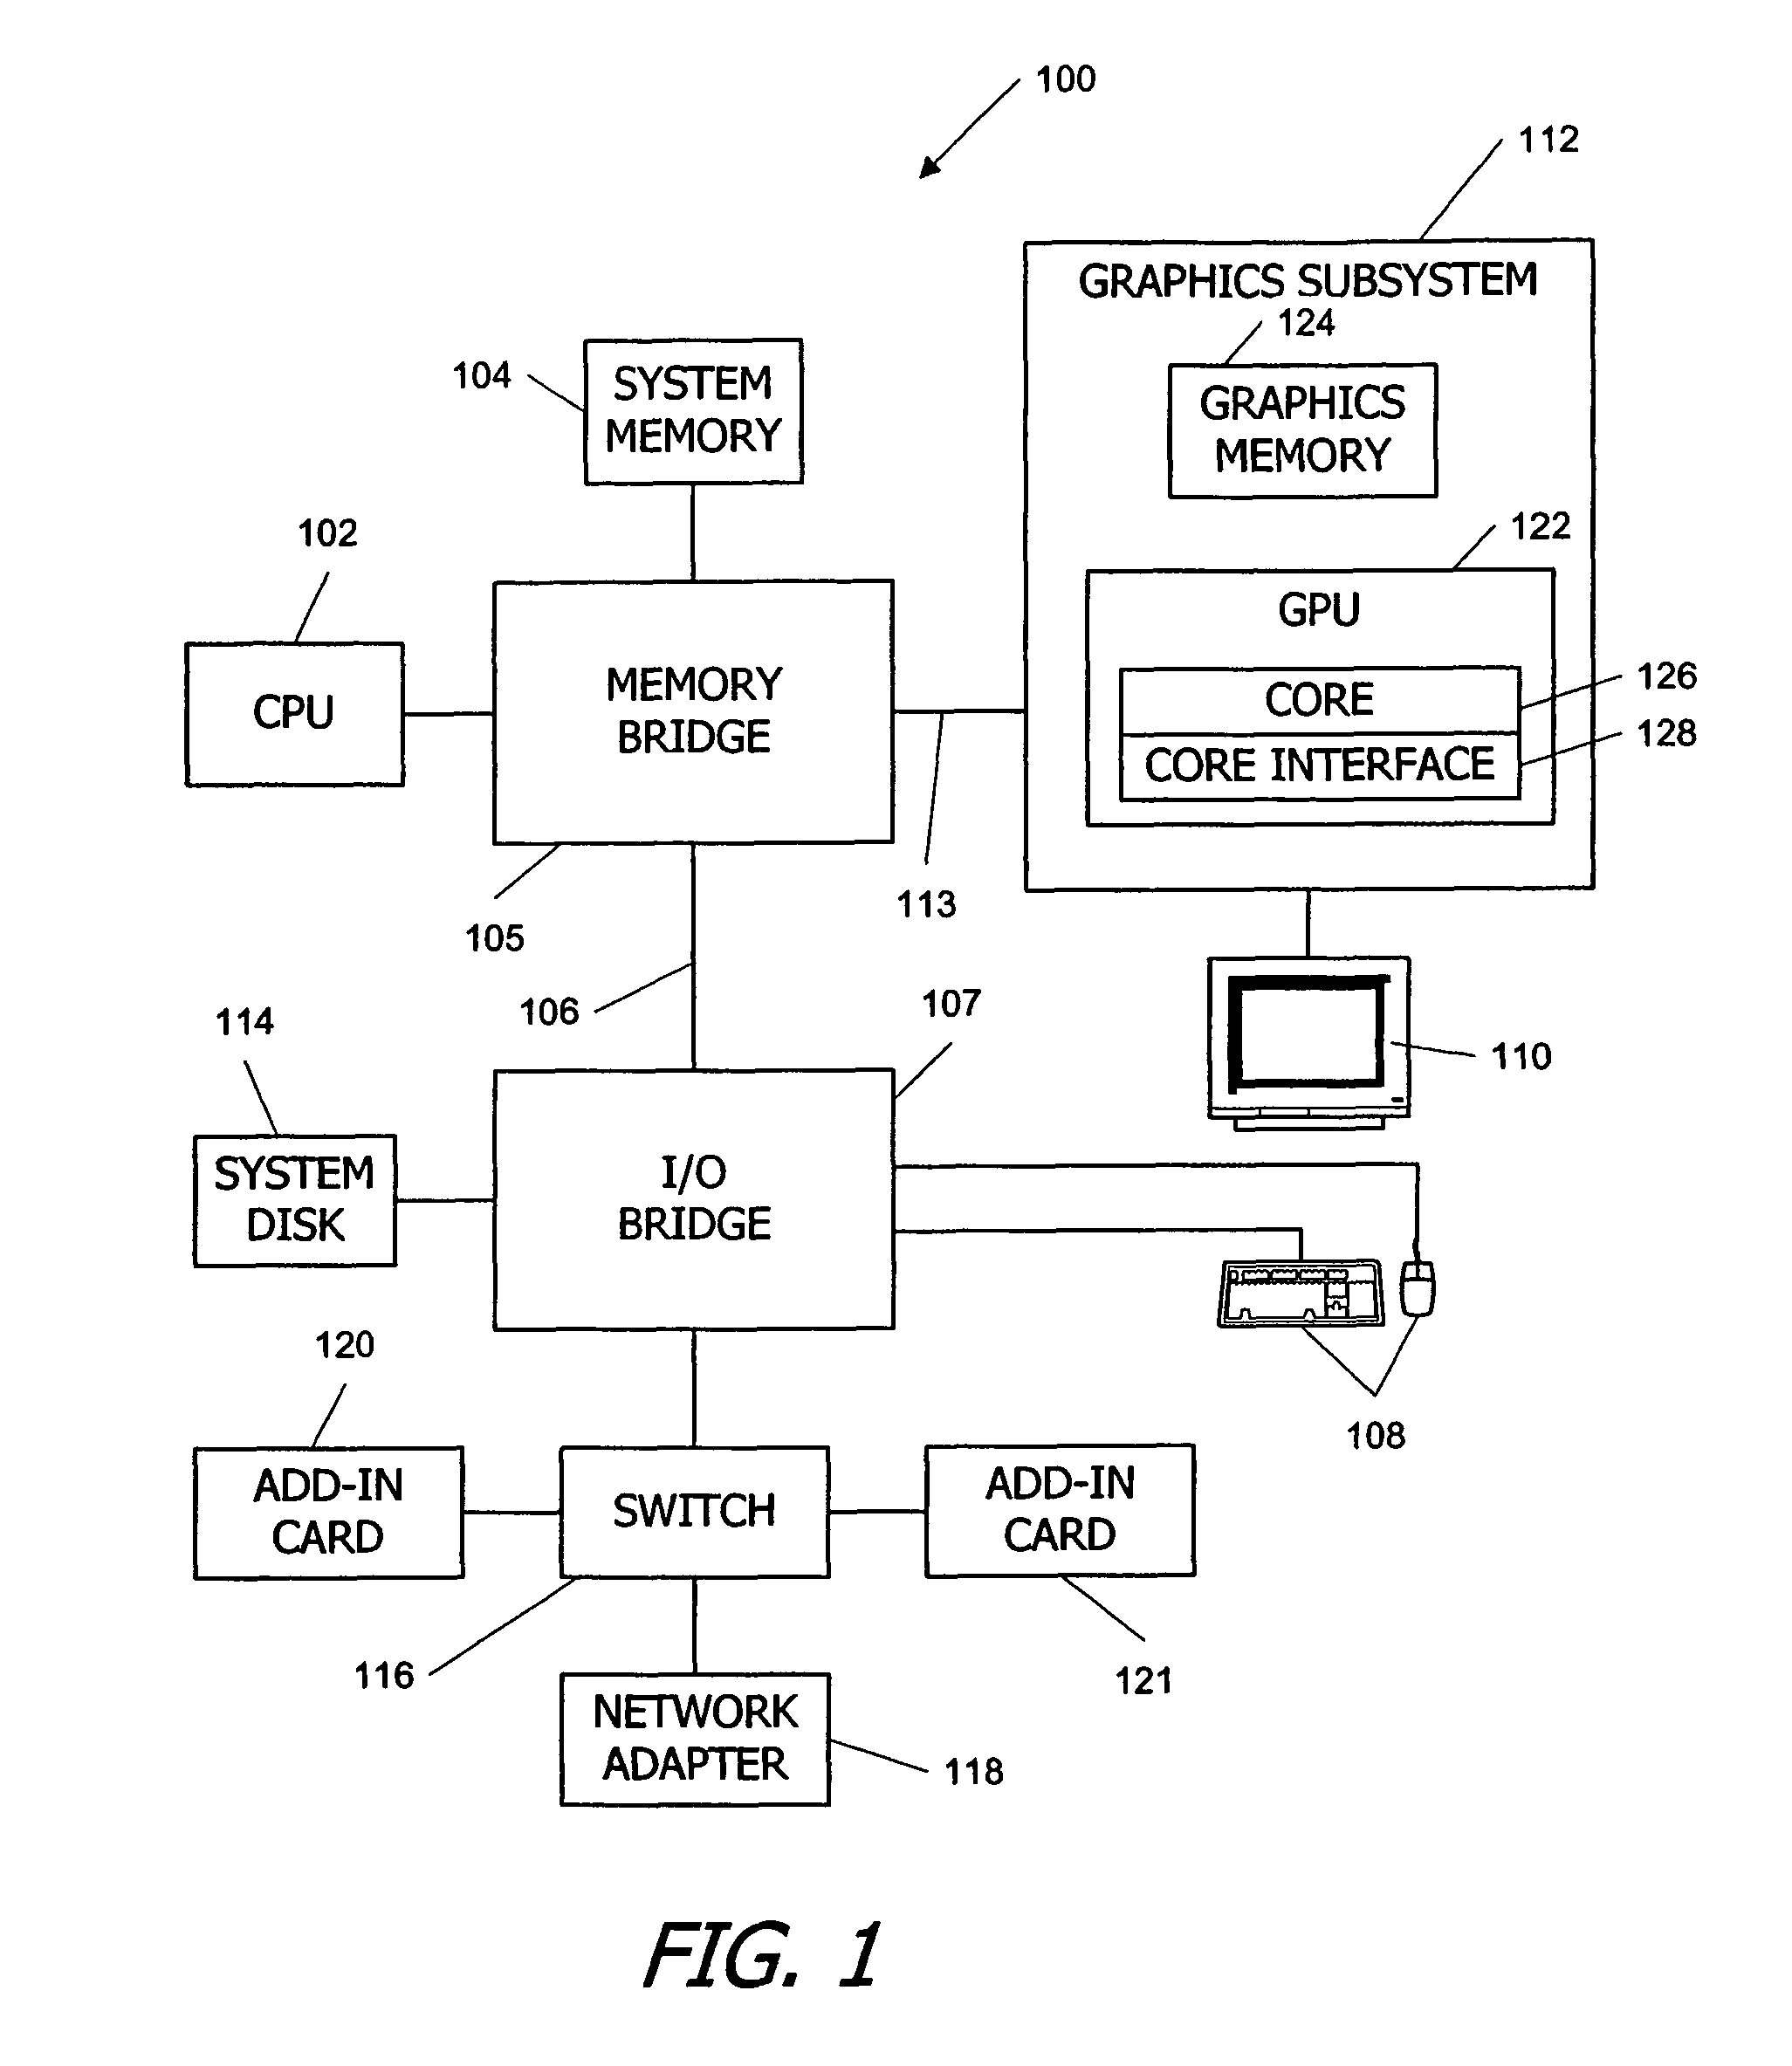 Parallel data processing systems and methods using cooperative thread arrays and thread identifier values to determine processing behavior